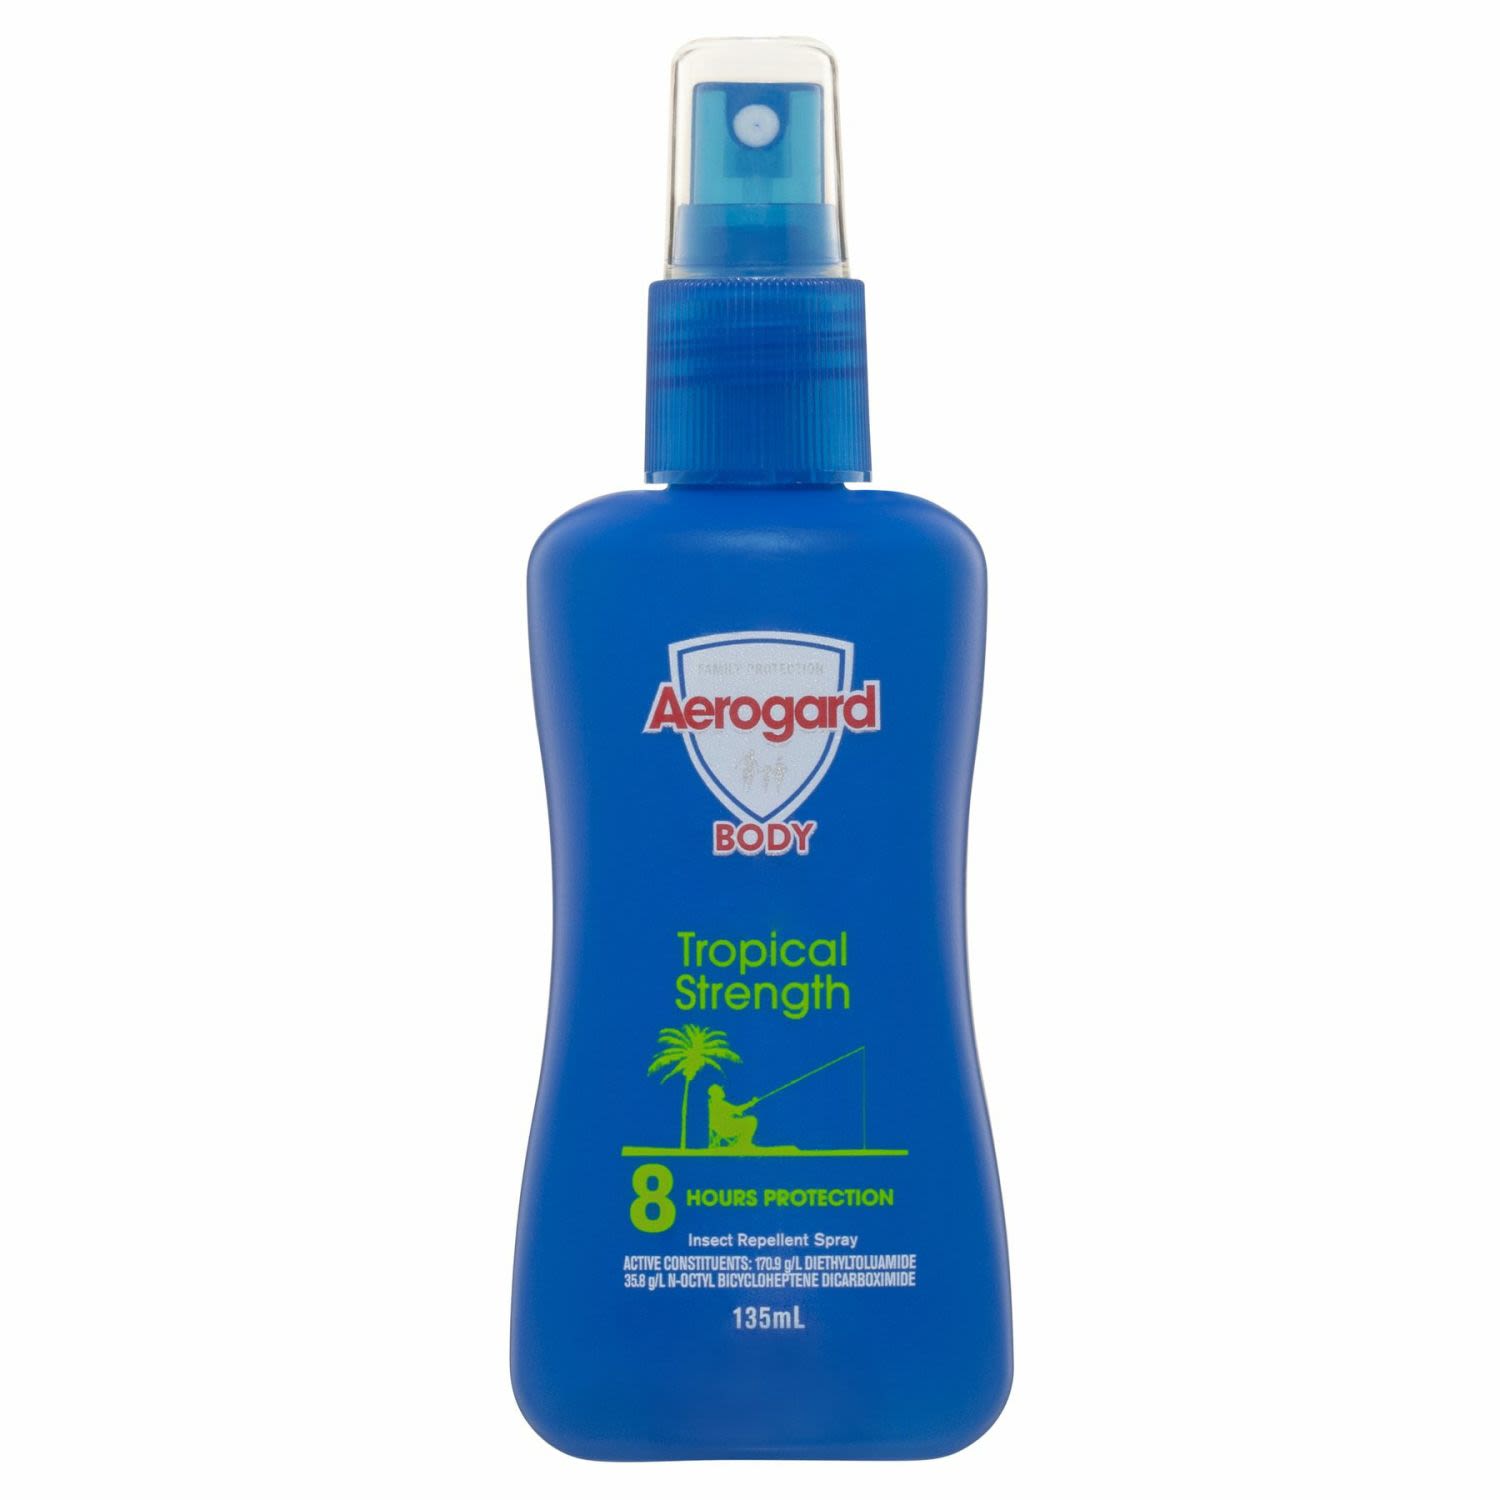 <p>Aerogard Tropical Strength Insect Repellent Spray</p><br><p>- 6 hour protection against mosquitoes<br />- Also repels flies, sandflies, leeches, ticks and other annoying and biting insects.</p><br><p>Hold pack upright and apply in a sweeping motion onto exposed skin from a distance of 15-20cm. To apply to face, spray on hands and rub onto skin. Do not spray directly onto face. Reapply as necessary in cases of excessive perspiration.</p><br /> <br />